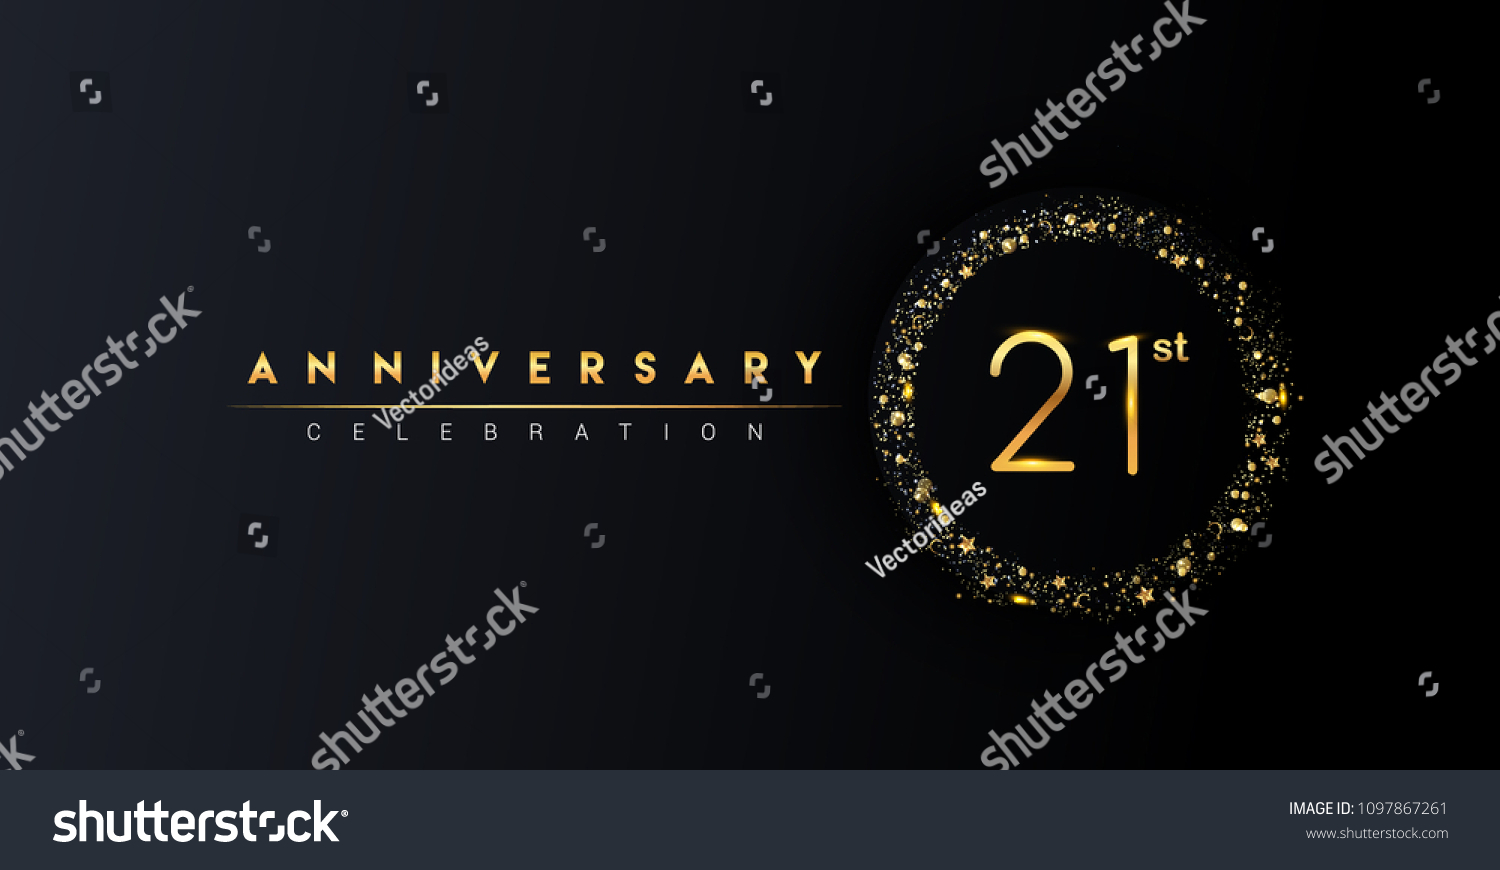 SVG of 21st anniversary logo with confetti and golden glitter ring isolated on black background, vector design for greeting card and invitation card. svg